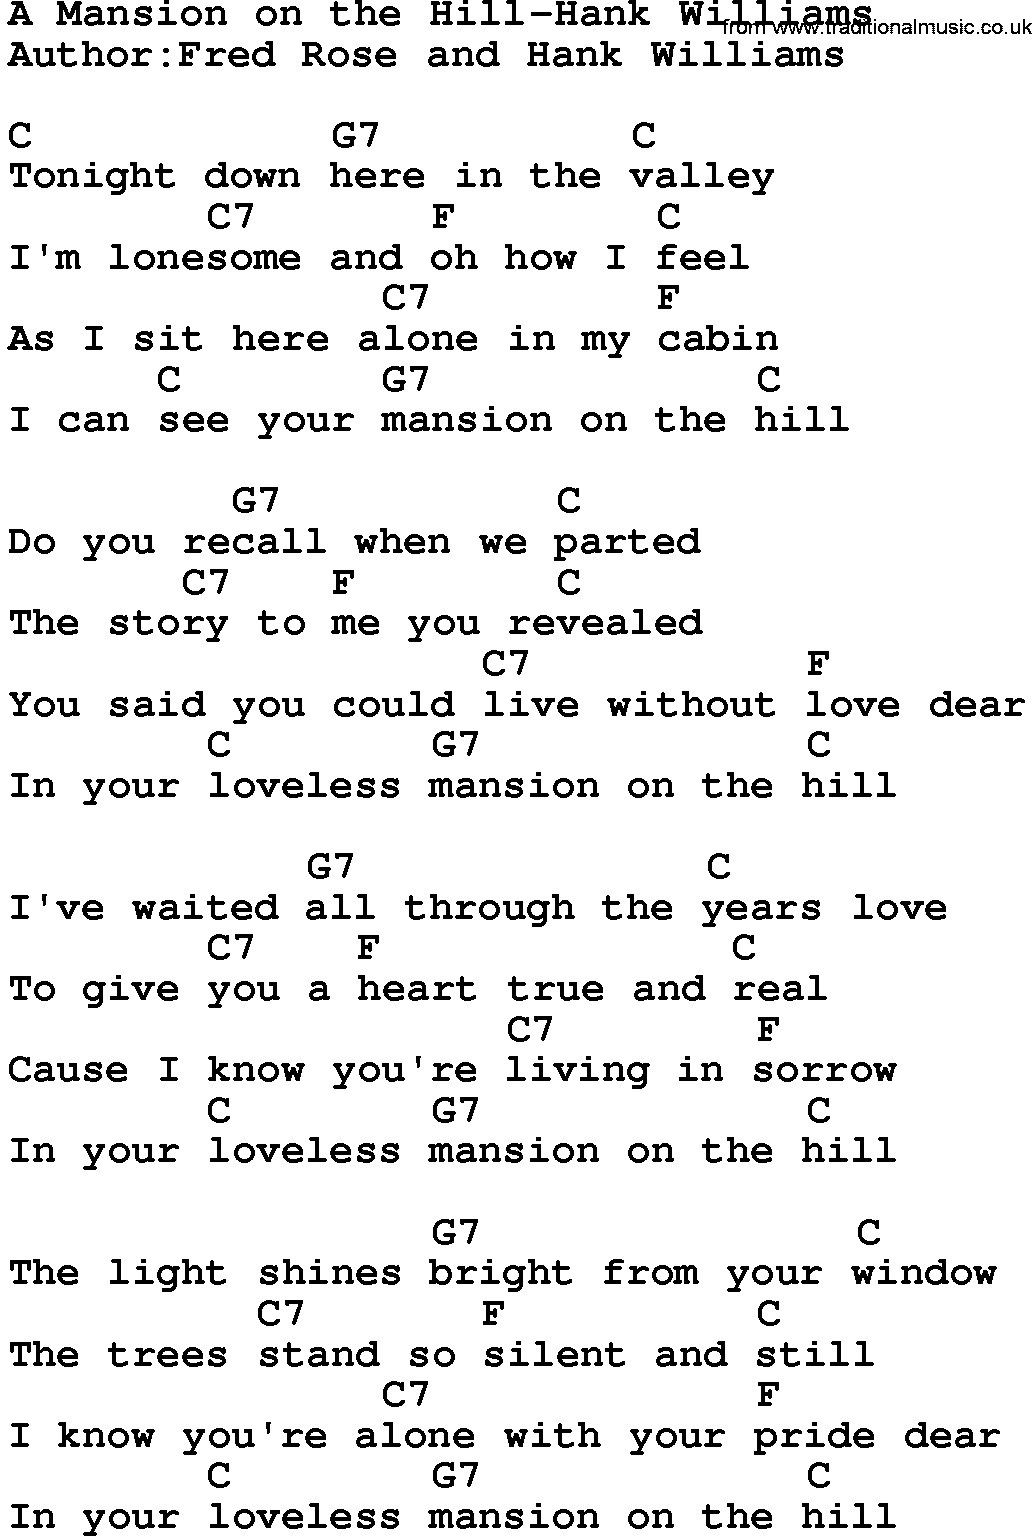 Country music song: A Mansion On The Hill-Hank Williams lyrics and chords